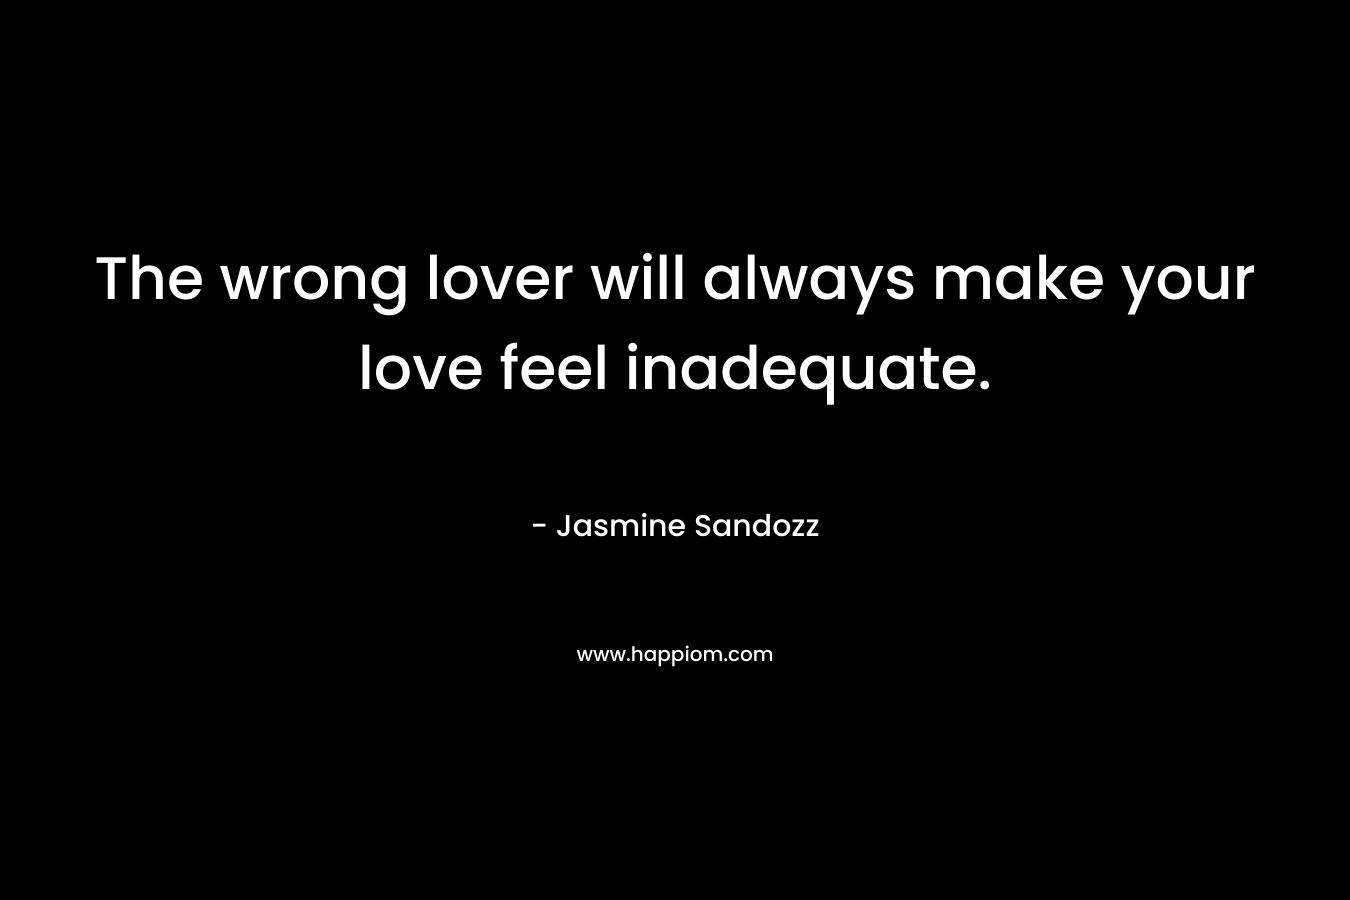 The wrong lover will always make your love feel inadequate. – Jasmine Sandozz